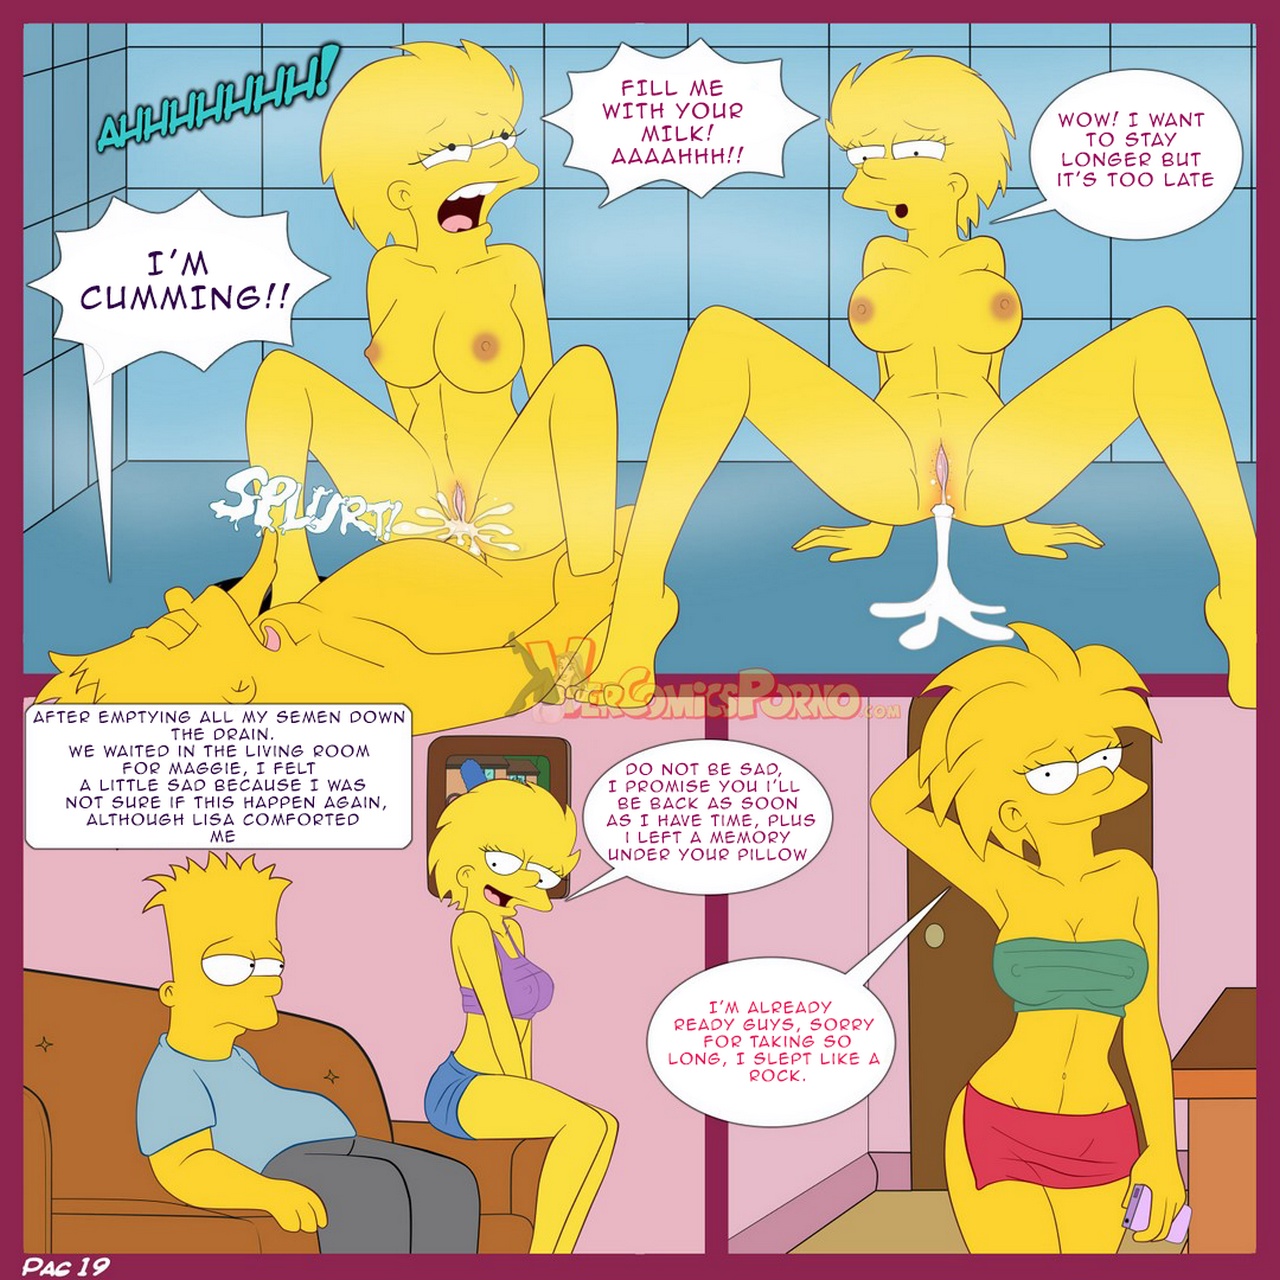 The Simpsons 1 - A Visit From The Sisterch - part 2